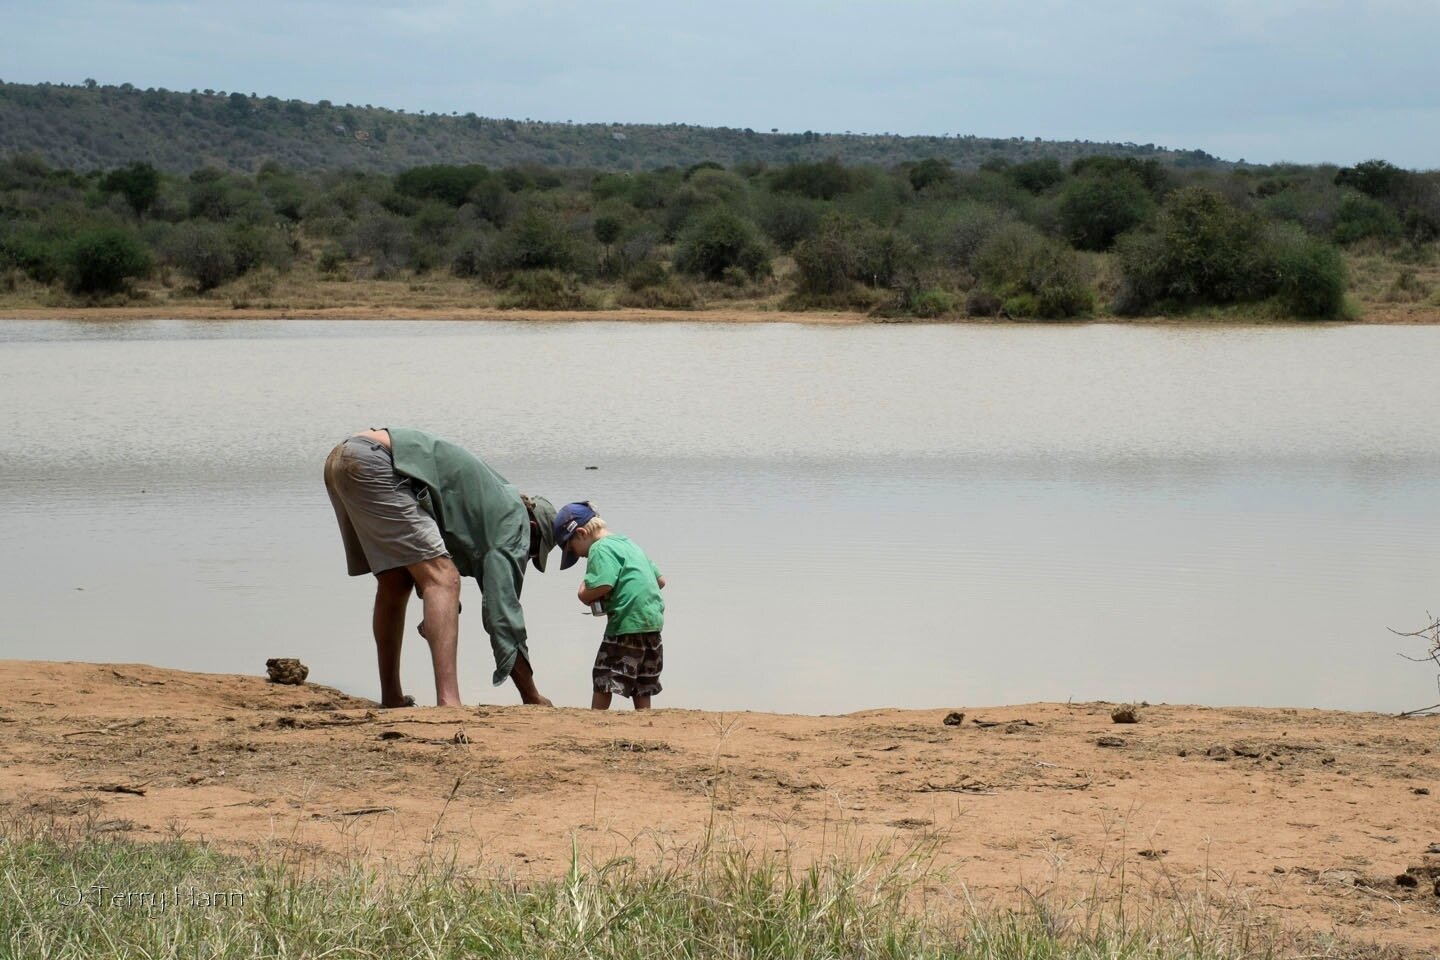 What is the perfect age to bring a child on a safari? We say as soon as possible, let us teach your little ones to explore and enjoy the wilderness. ⁠
⁠
⁠
#Activities #Adventure #ChildFriendly #TailorMade⁠
#Wilderness #LaikipiaWilderness #Camp #Safar